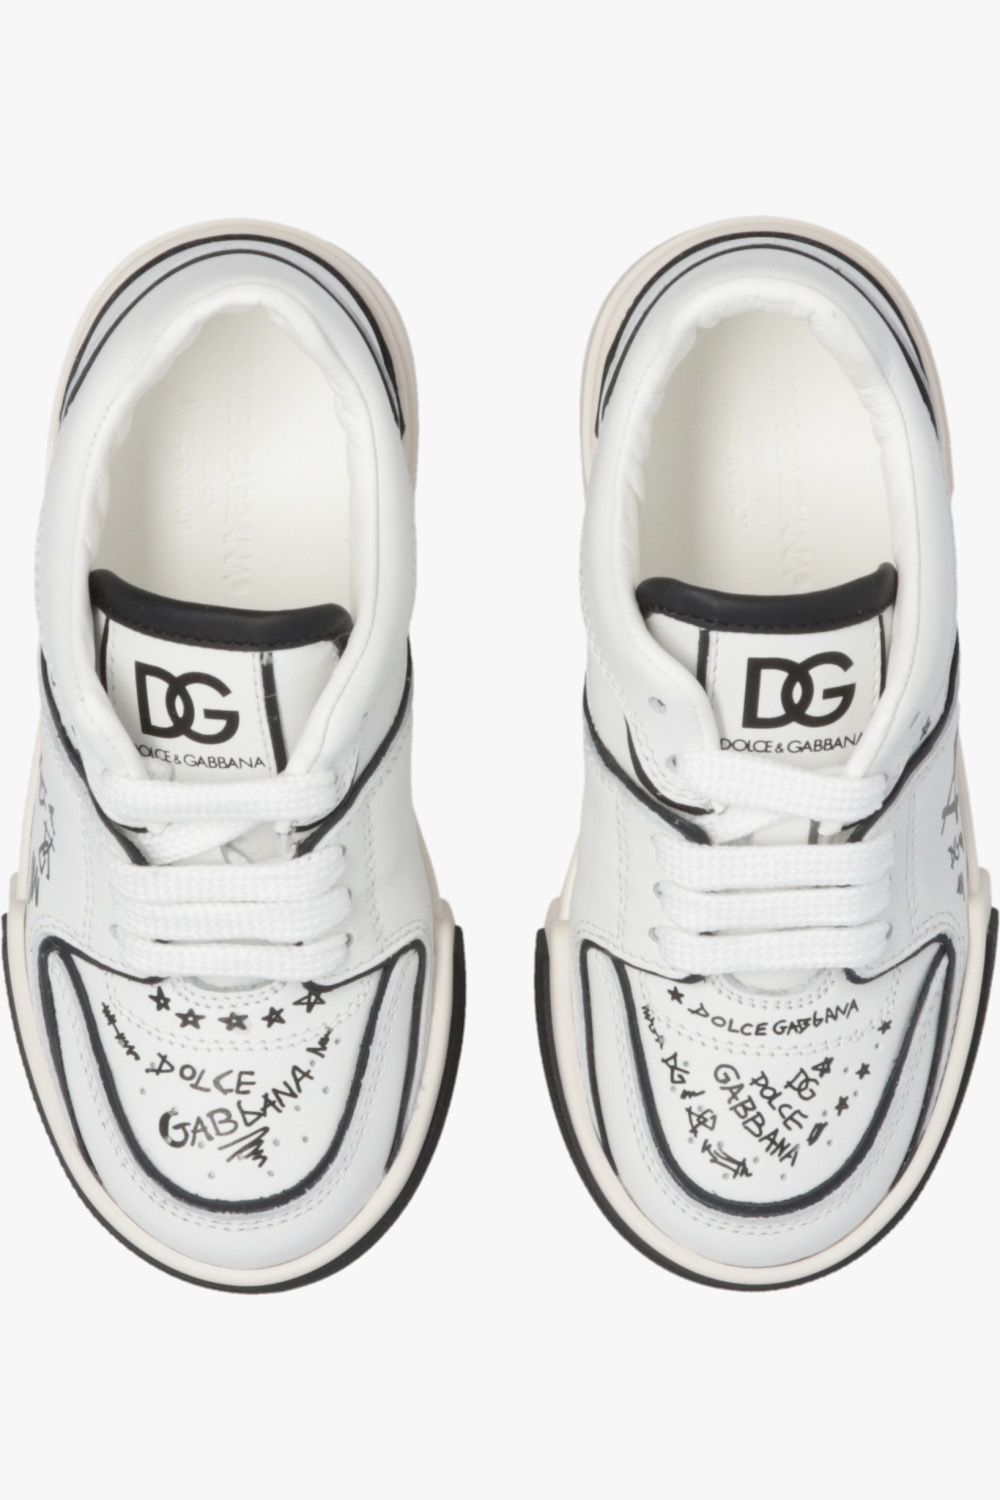 dolce Baby & Gabbana Kids Patterned sneakers